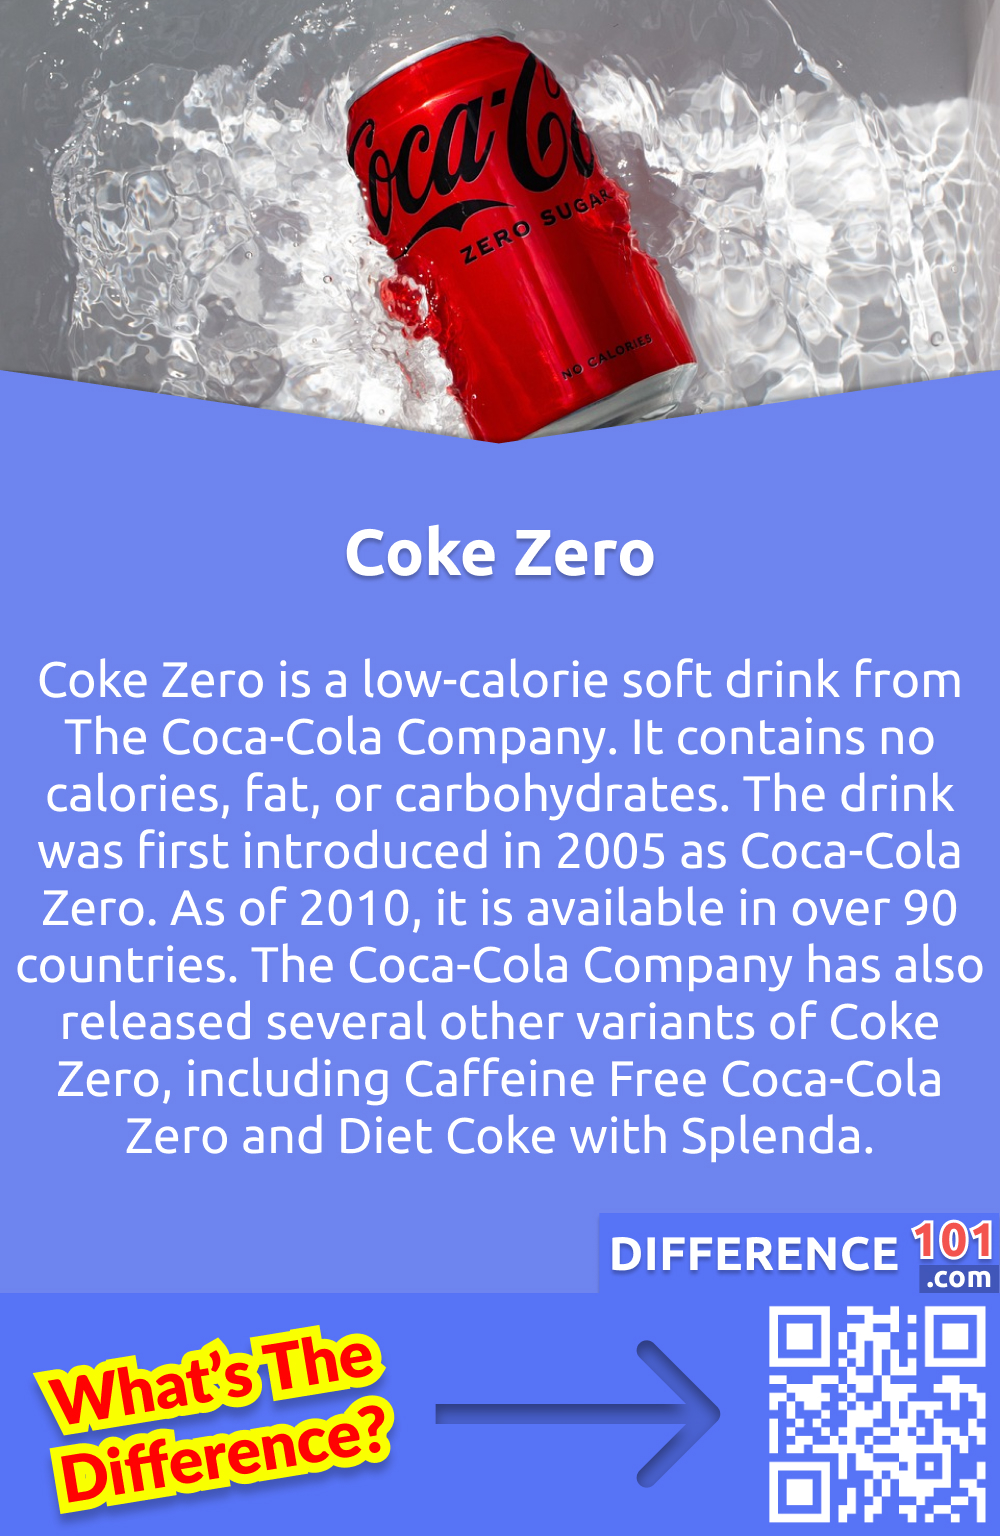 What Is Coke Zero? Coke Zero is a low-calorie soft drink from The Coca-Cola Company. It contains no calories, fat, or carbohydrates. The drink was first introduced in 2005 as Coca-Cola Zero. As of 2010, it is available in over 90 countries. The Coca-Cola Company has also released several other variants of Coke Zero, including Caffeine Free Coca-Cola Zero and Diet Coke with Splenda.